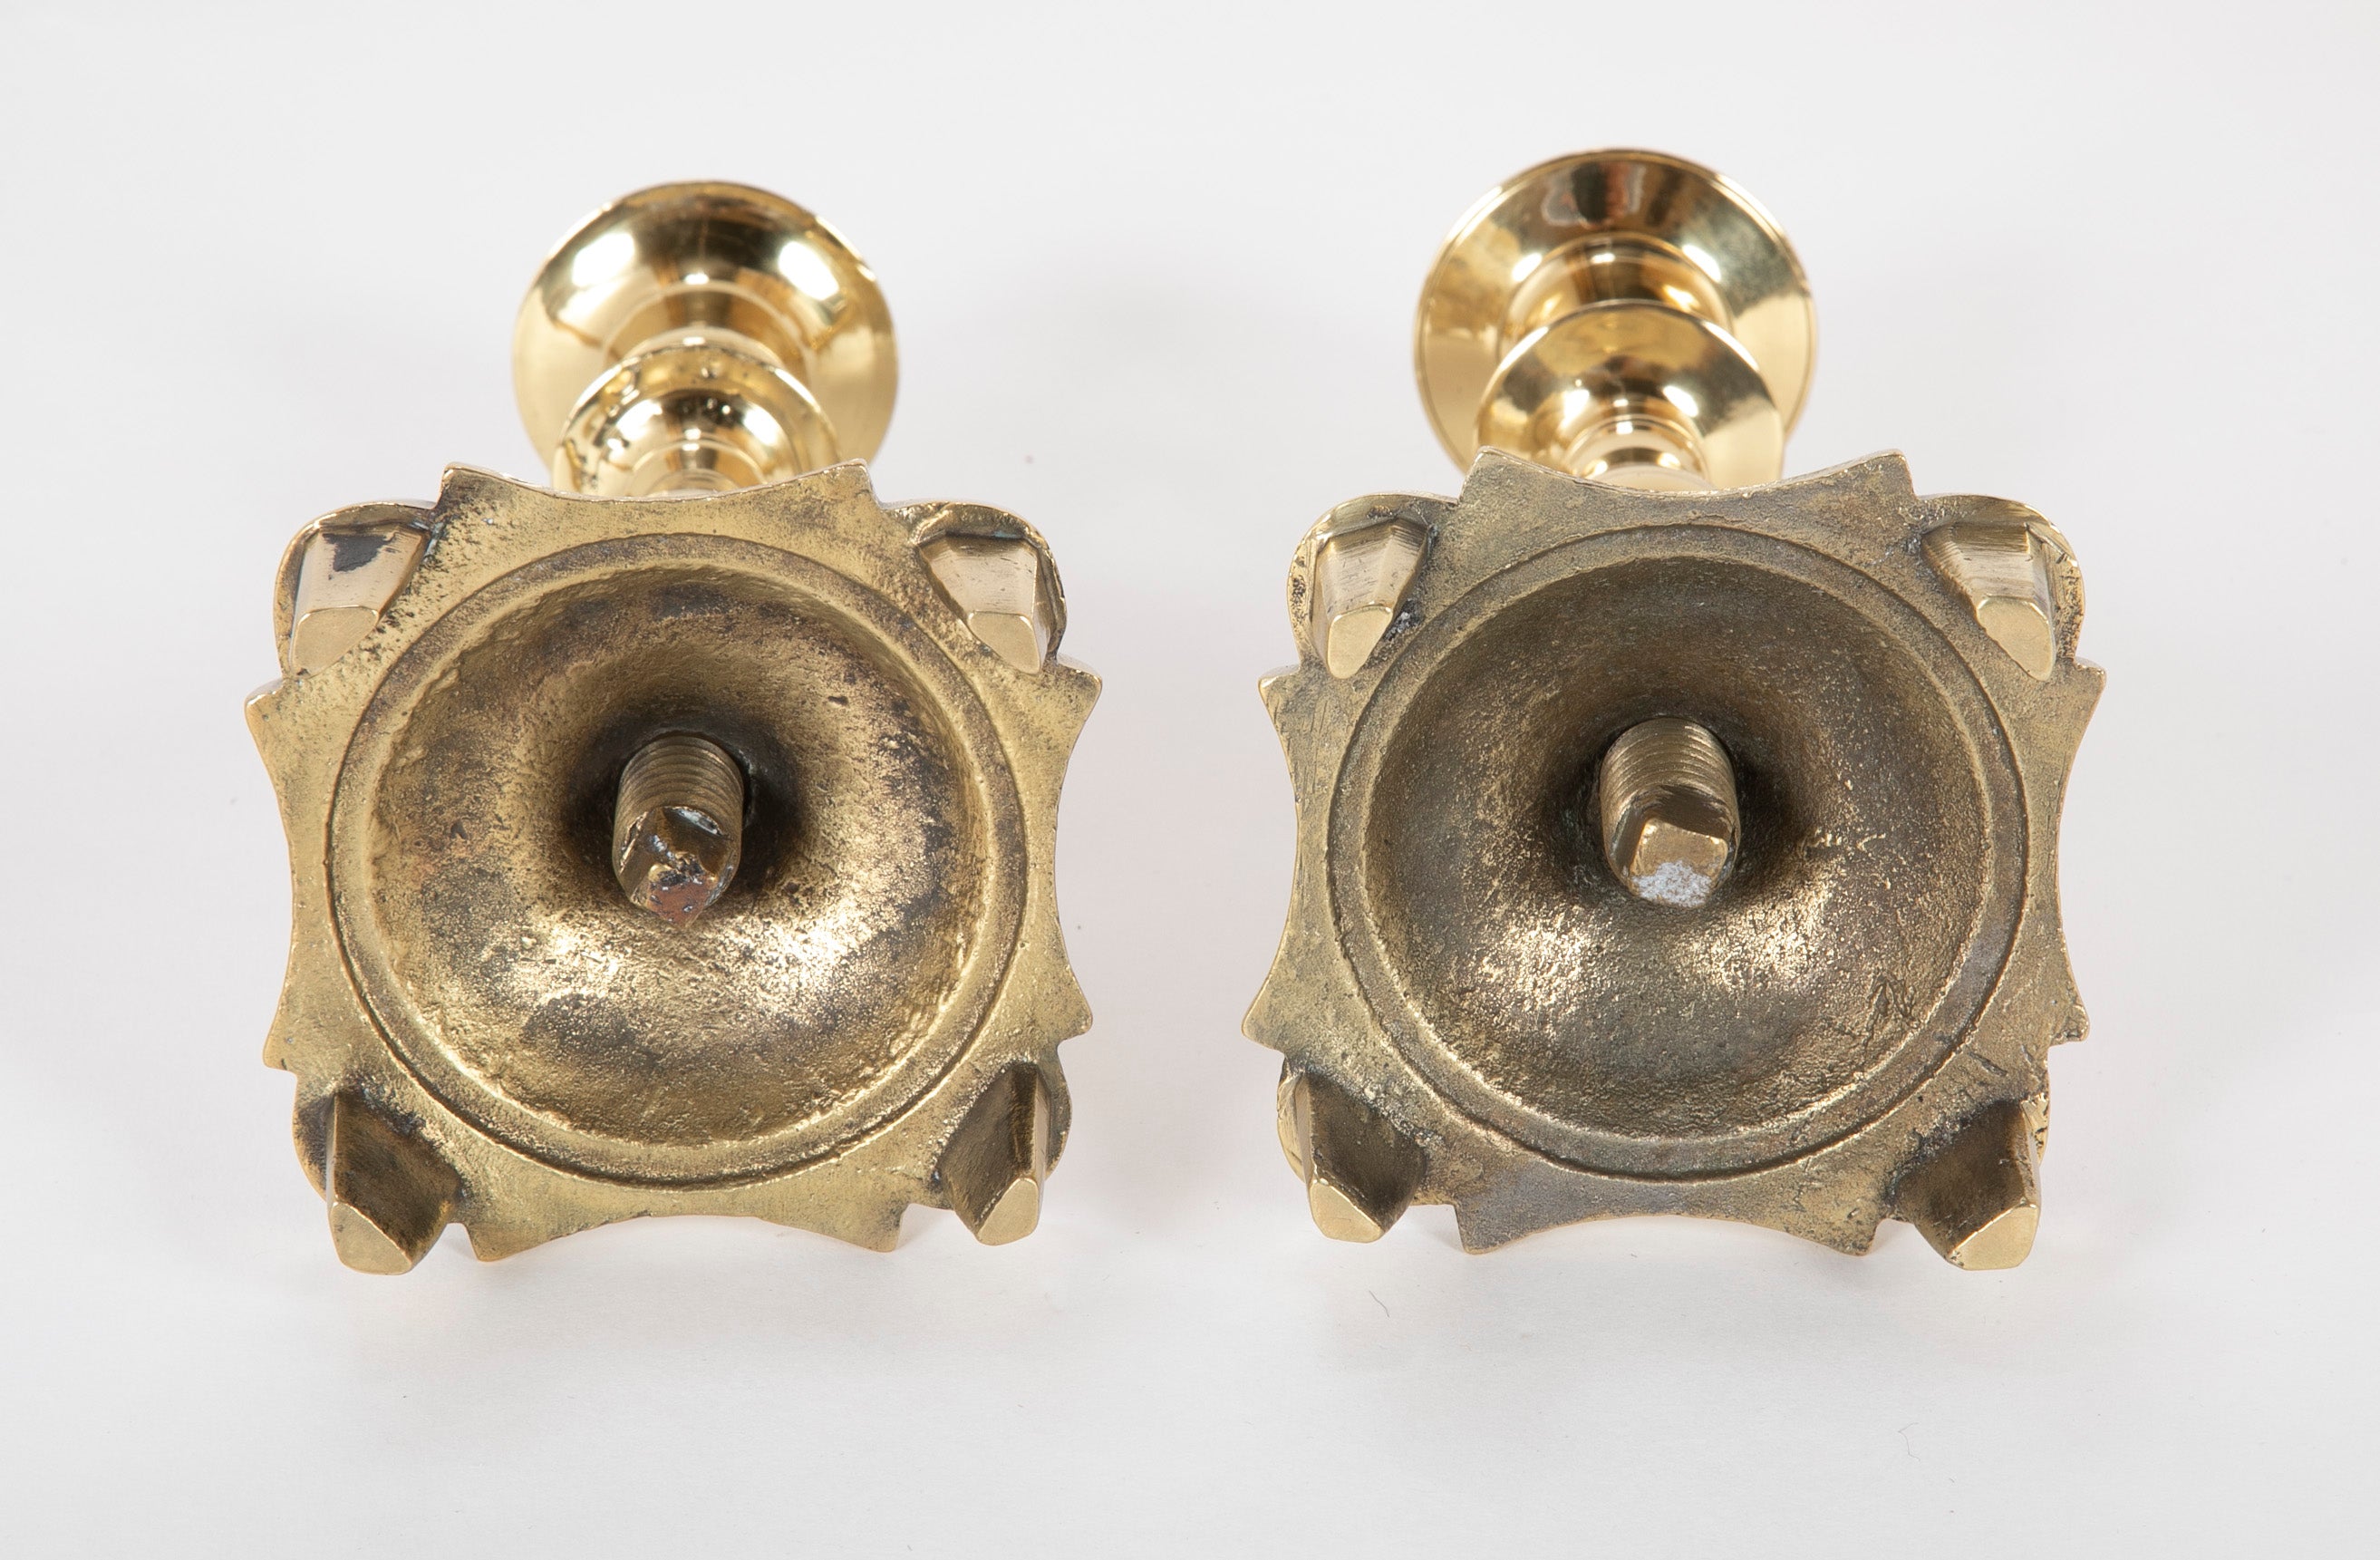 Pair of Brass Candle Sticks